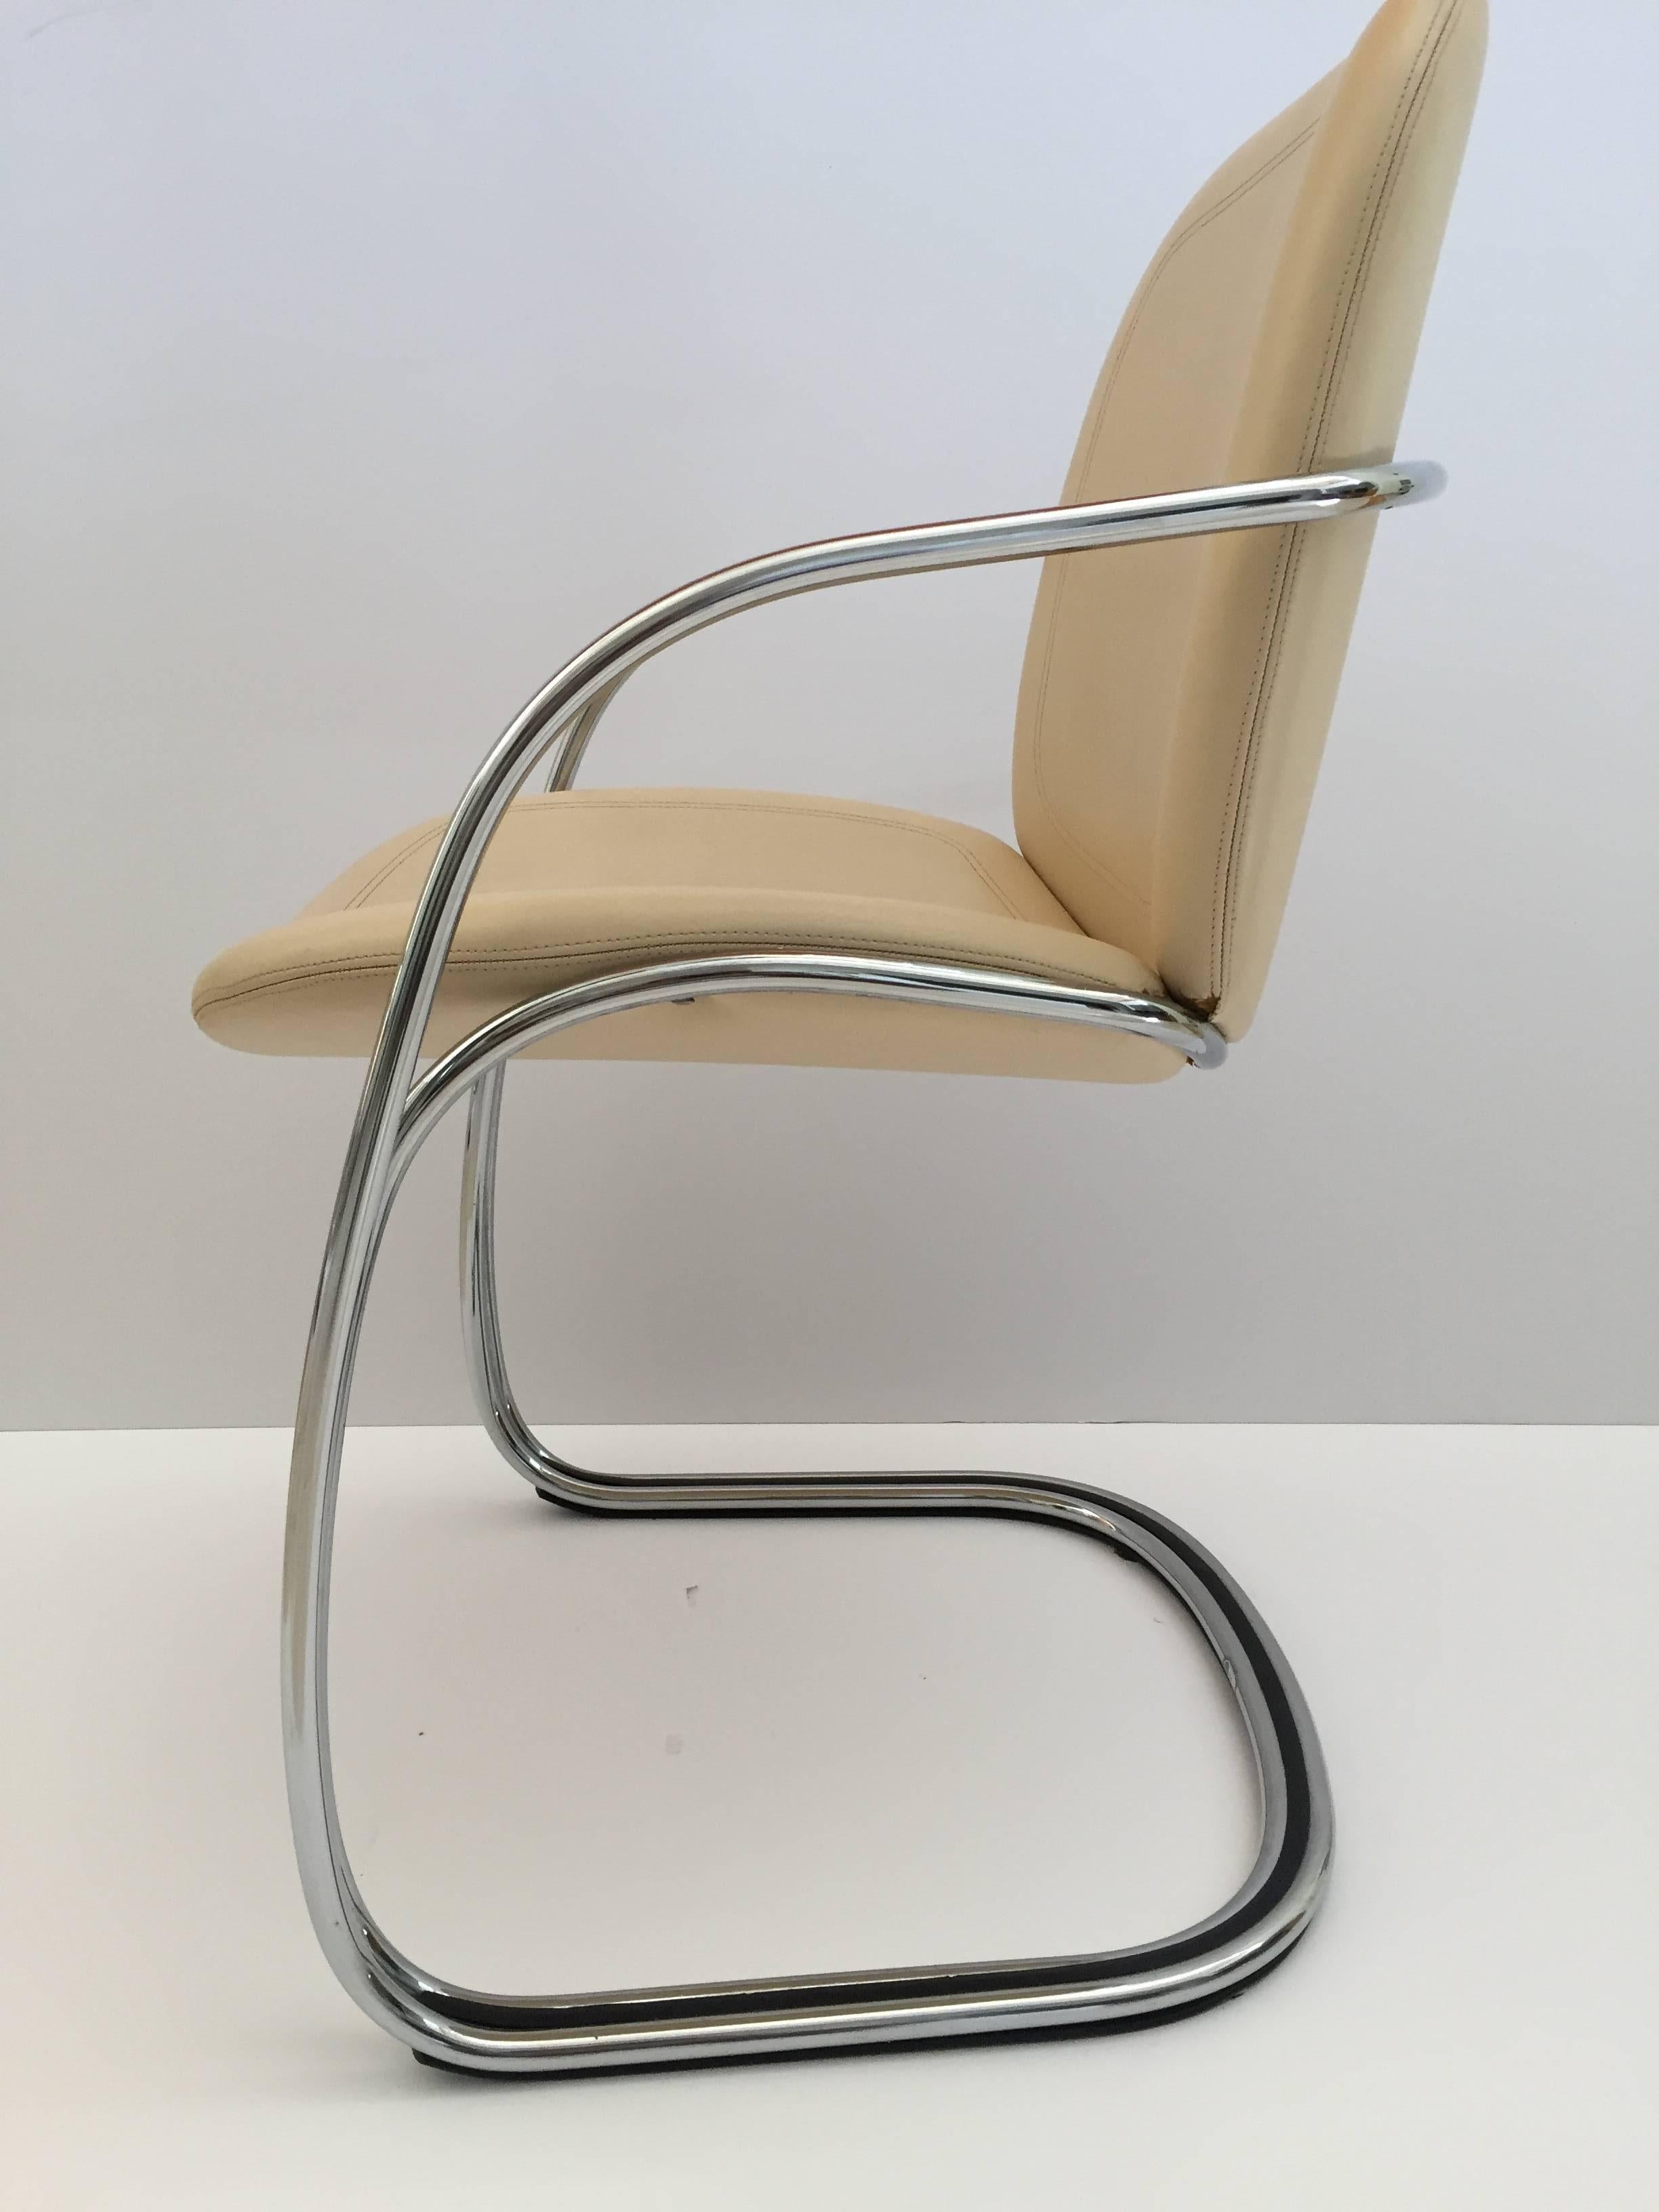 Hand-Crafted Italian Chrome and Leather Chairs, by Gastone Rinaldi for RIMA, circa 1970s